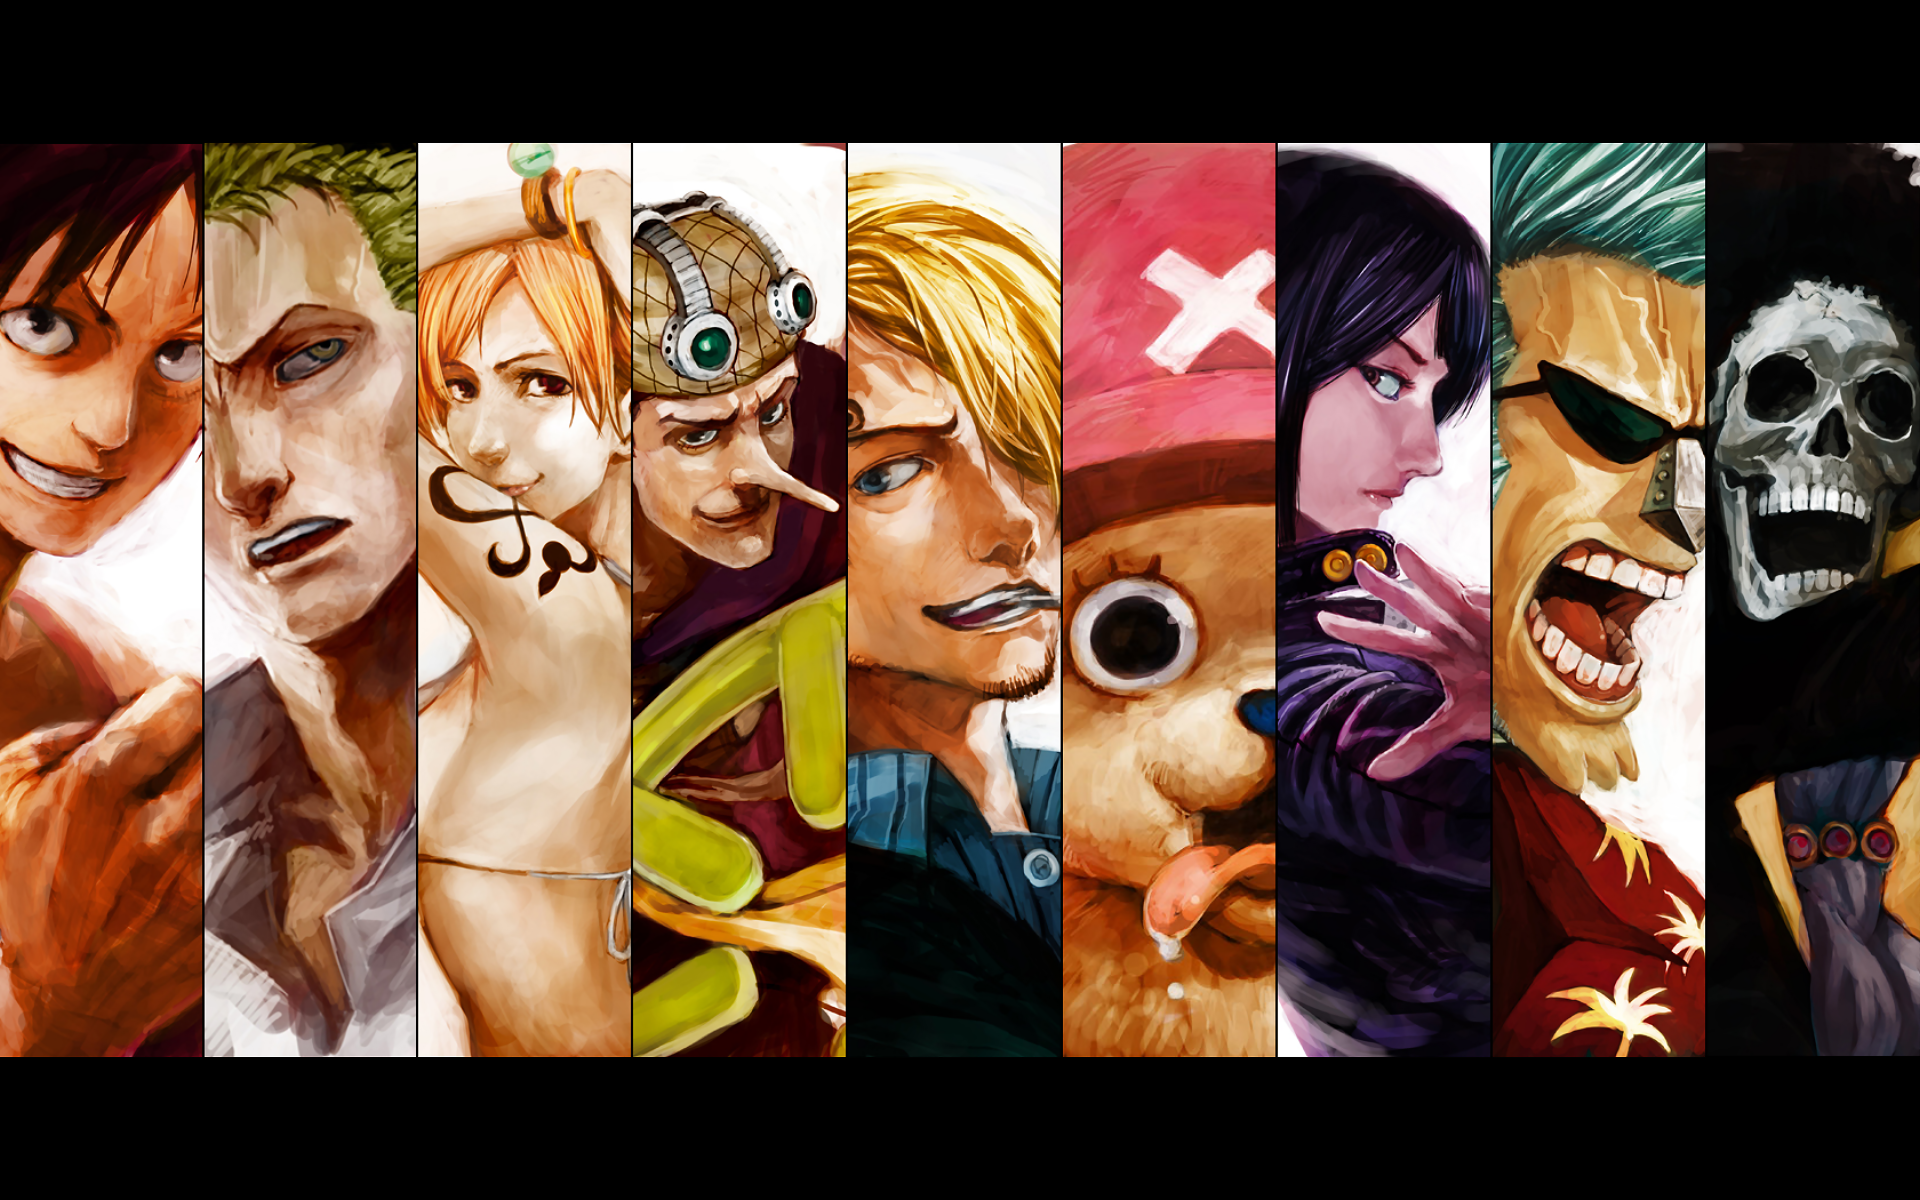 Free Download One Piece Manga Wallpaper Backgrounds 19x10 For Your Desktop Mobile Tablet Explore 77 Onepiece Wallpaper 4k One Piece Wallpaper One Piece Wallpapers Hd Nami One Piece Wallpaper